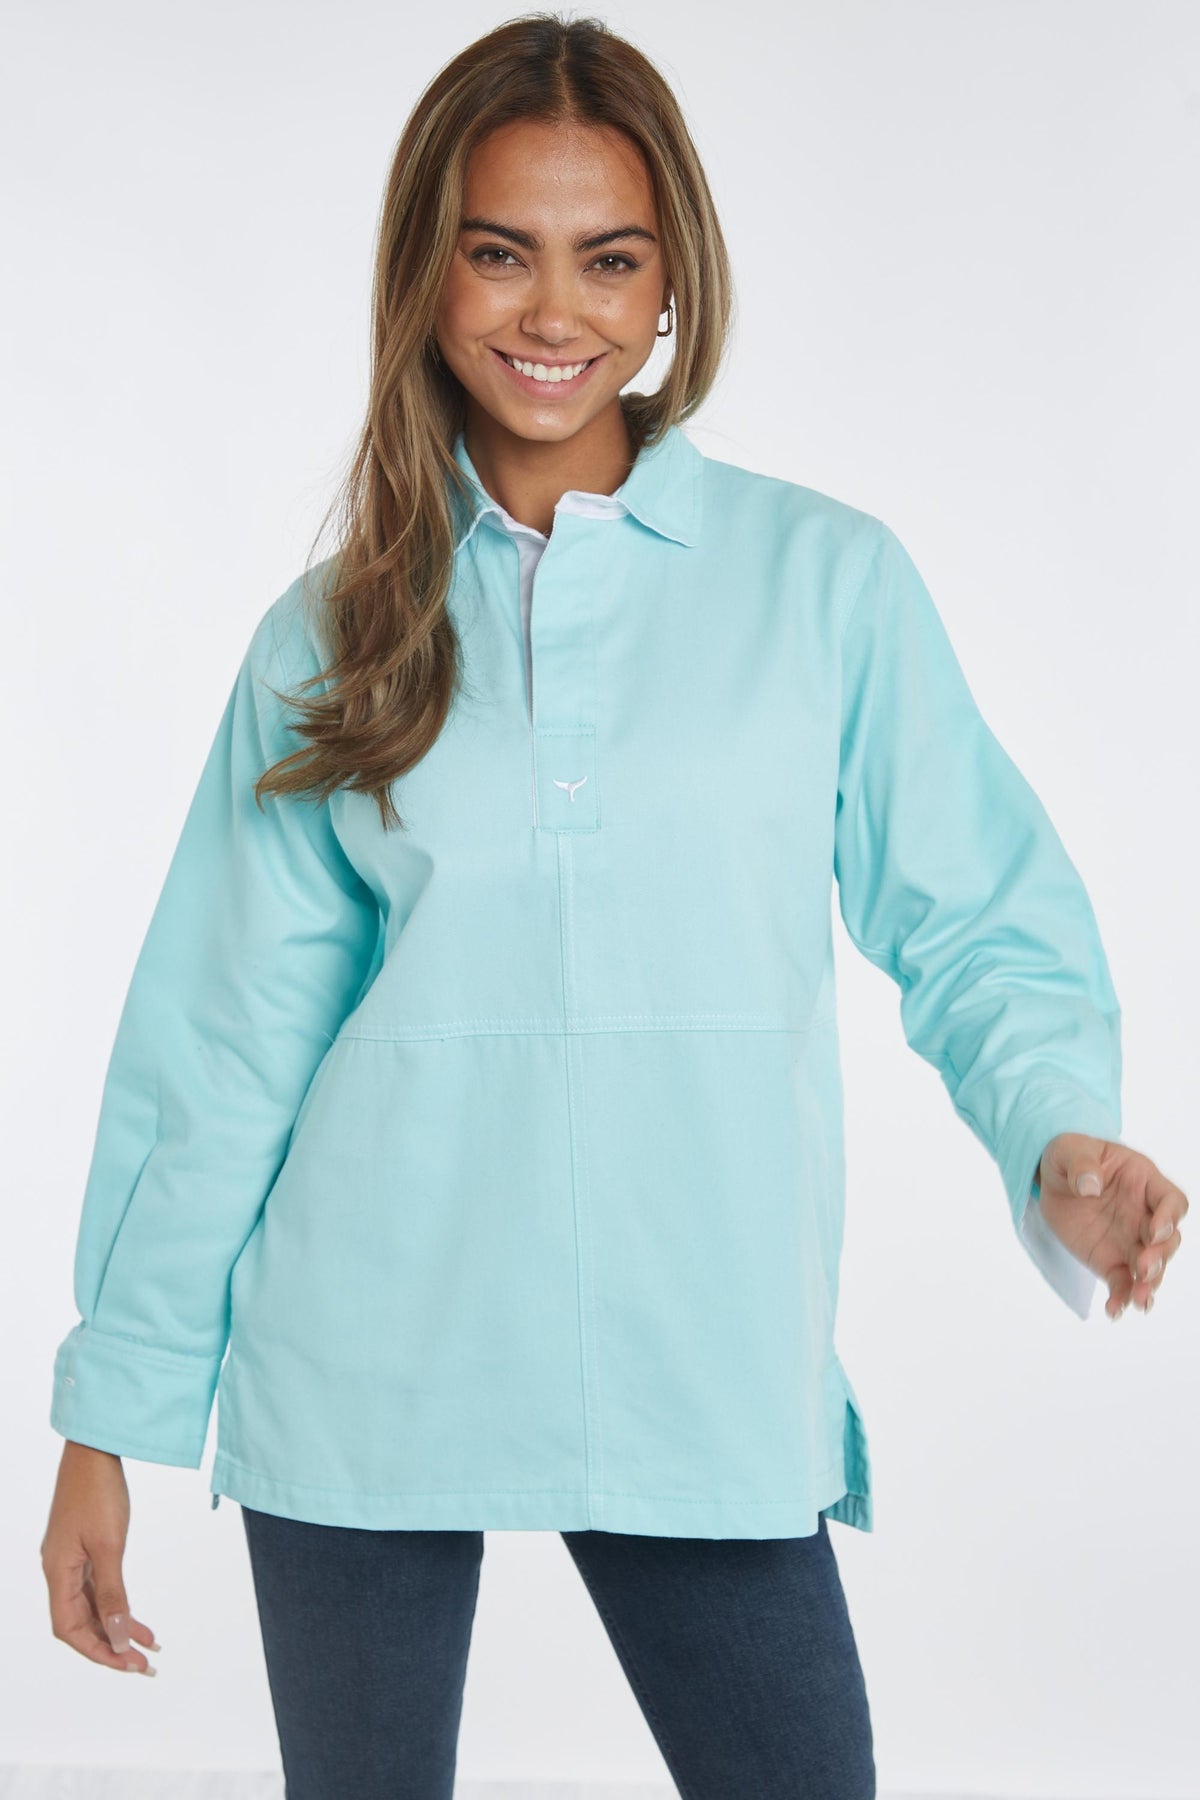 Newquay Deck Shirt - Mint Green - Whale Of A Time Clothing